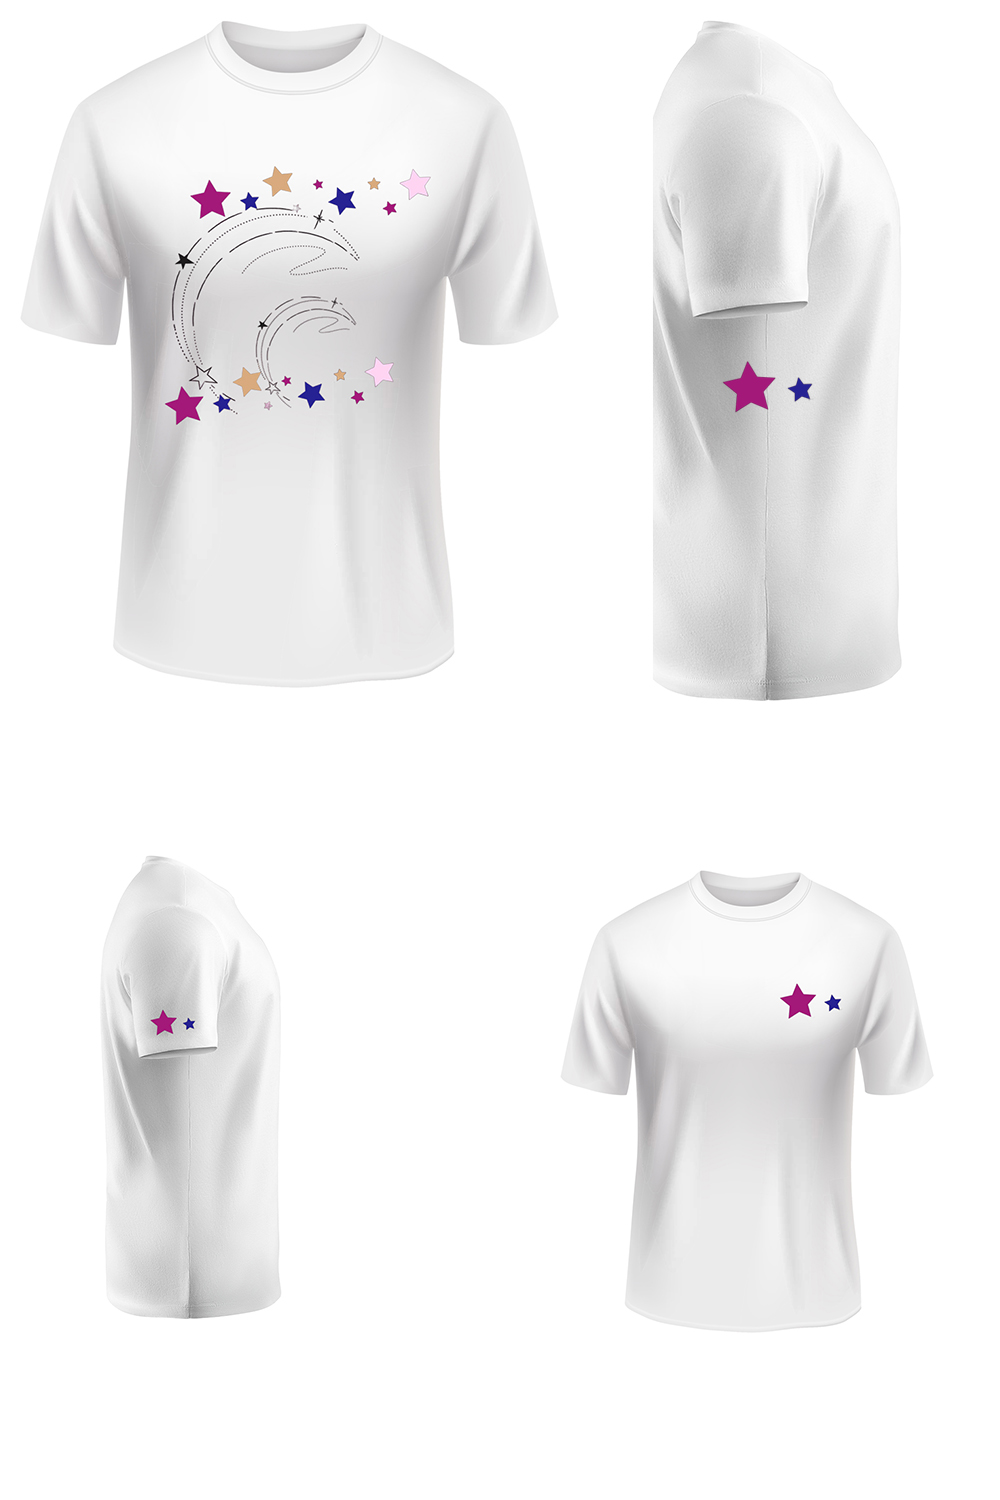 T-shirt design for printing - Moon | Stars pinterest preview image.